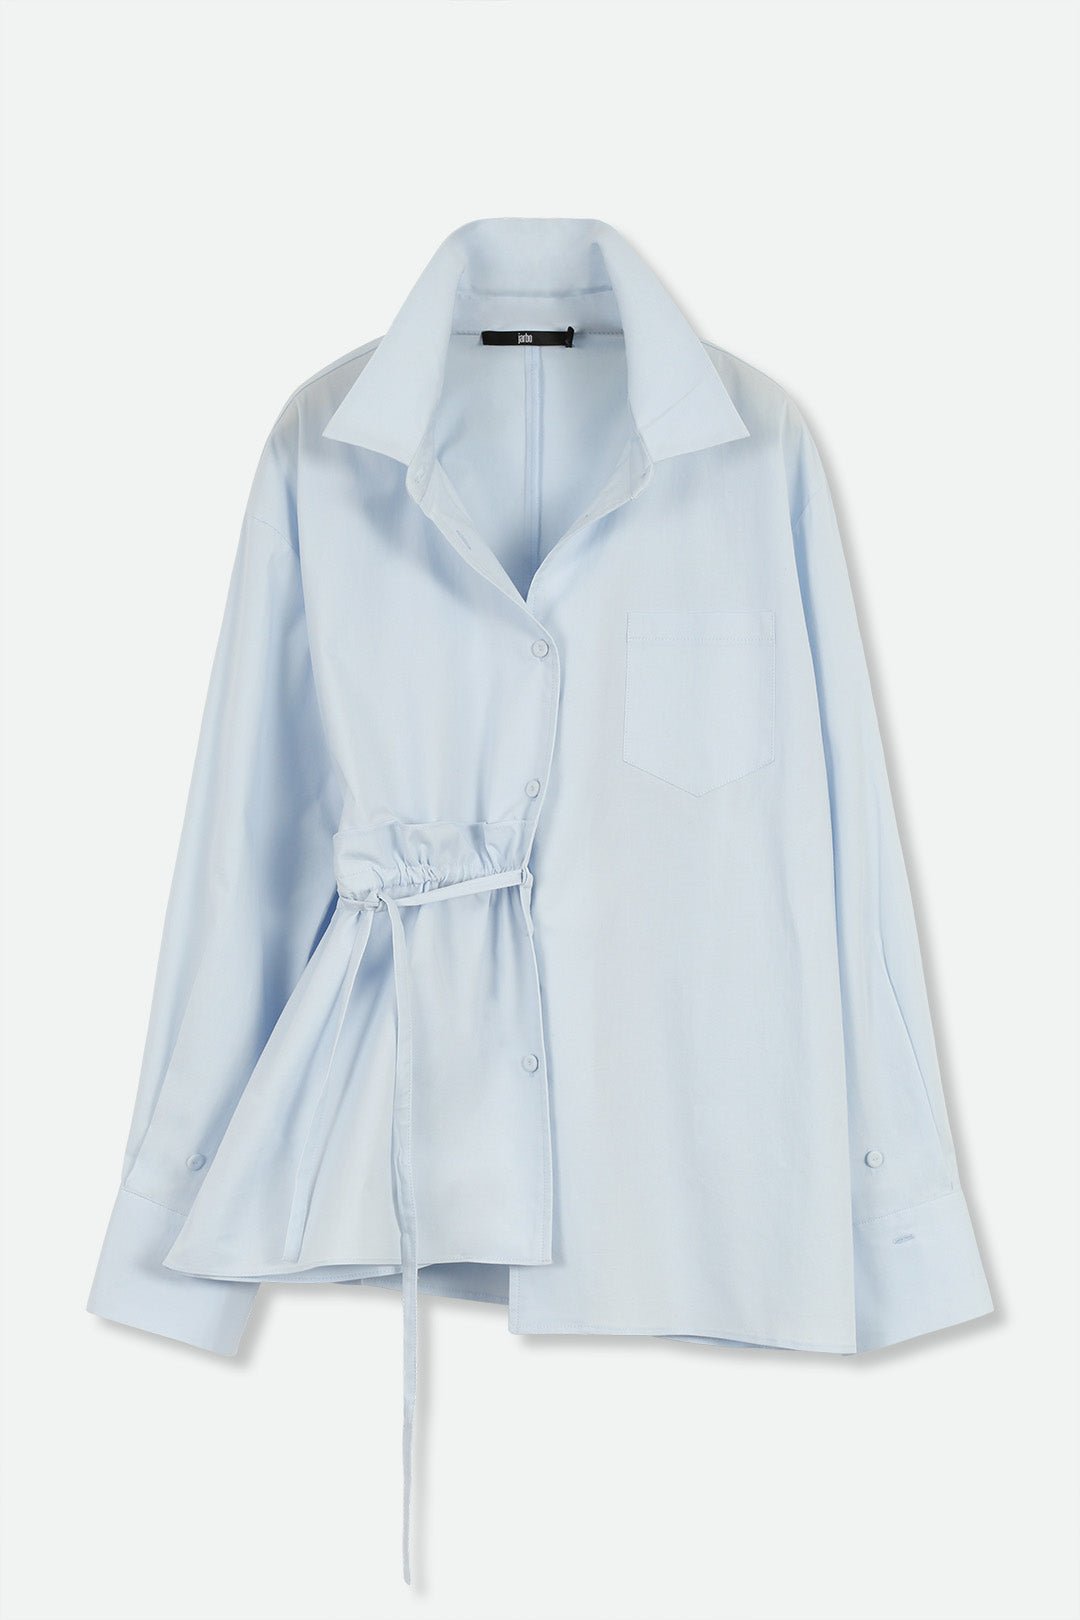 SABRINA SIDE-CINCH SHIRT IN ITALIAN COTTON STRETCH IN BABY BLUE - Jarbo